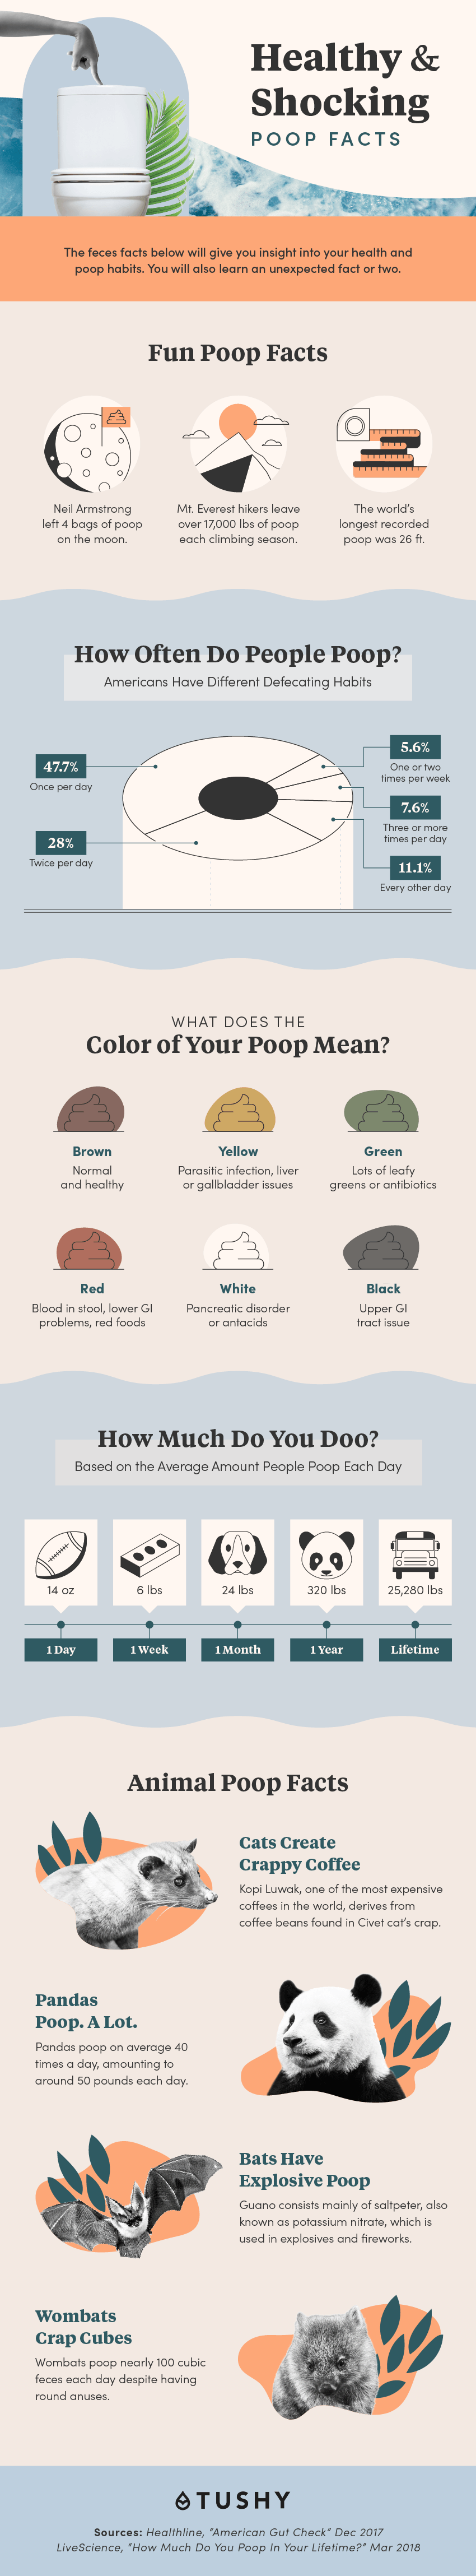 Healthy and shocking poop facts infographic